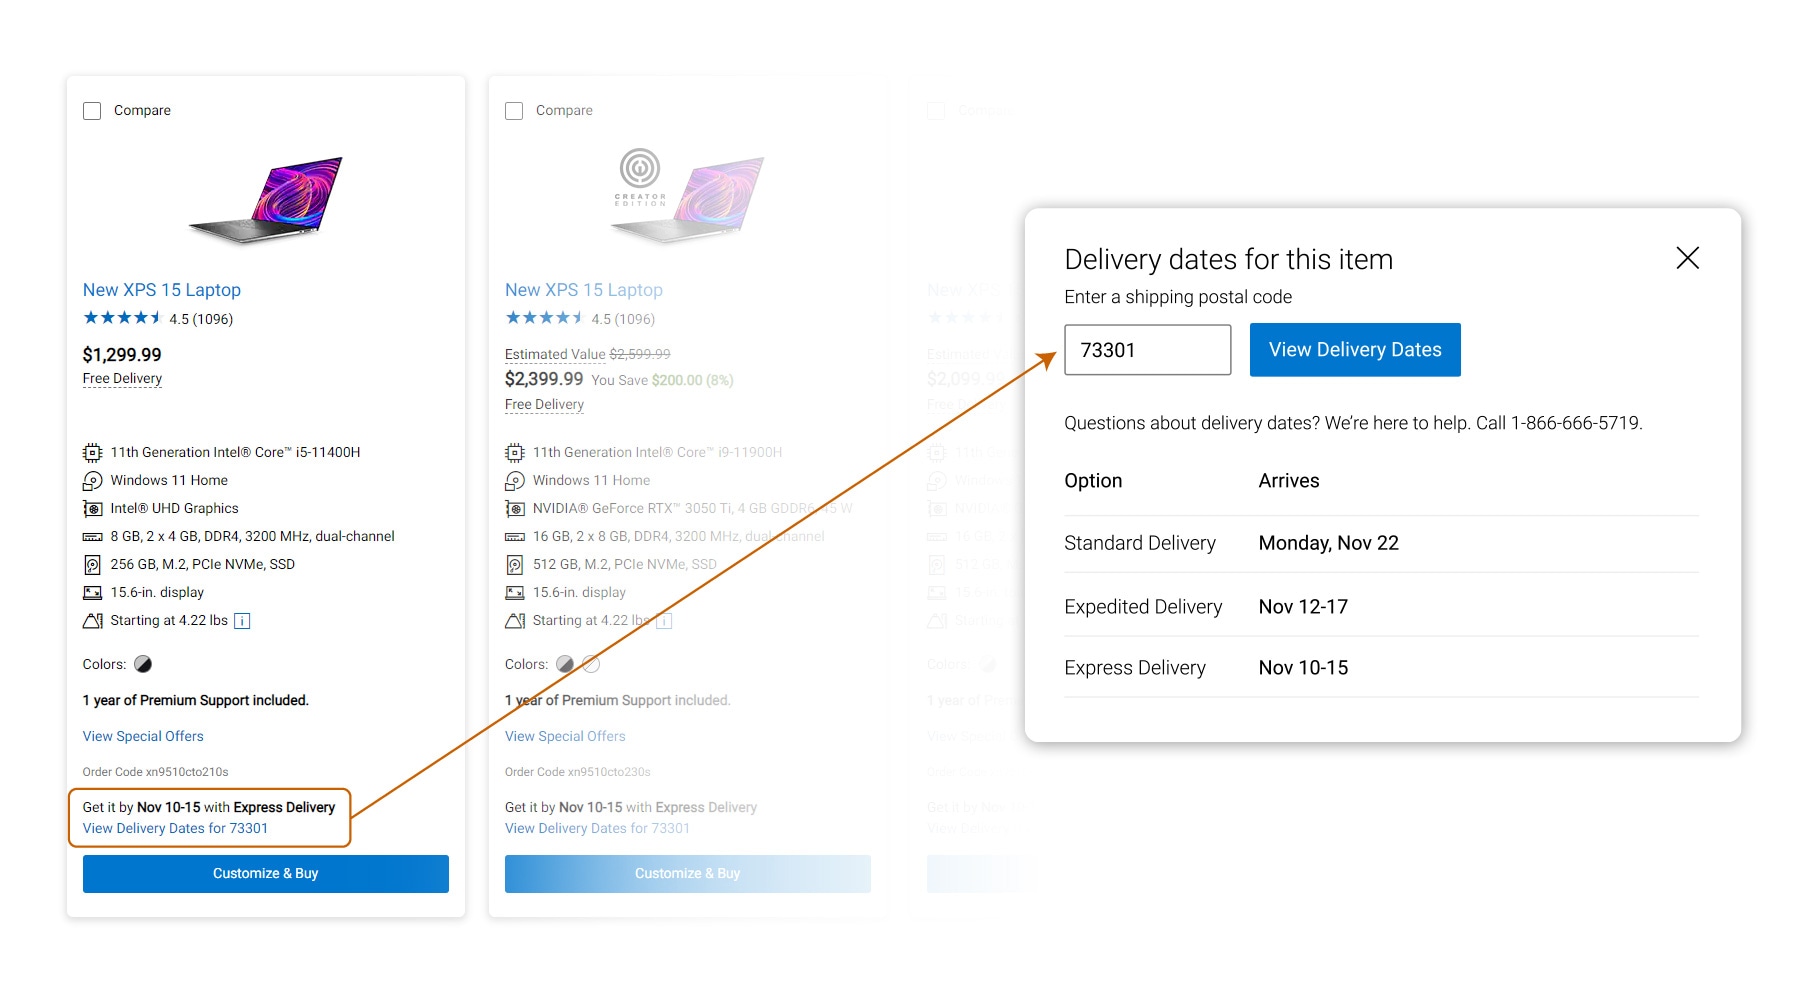 View Delivery Dates